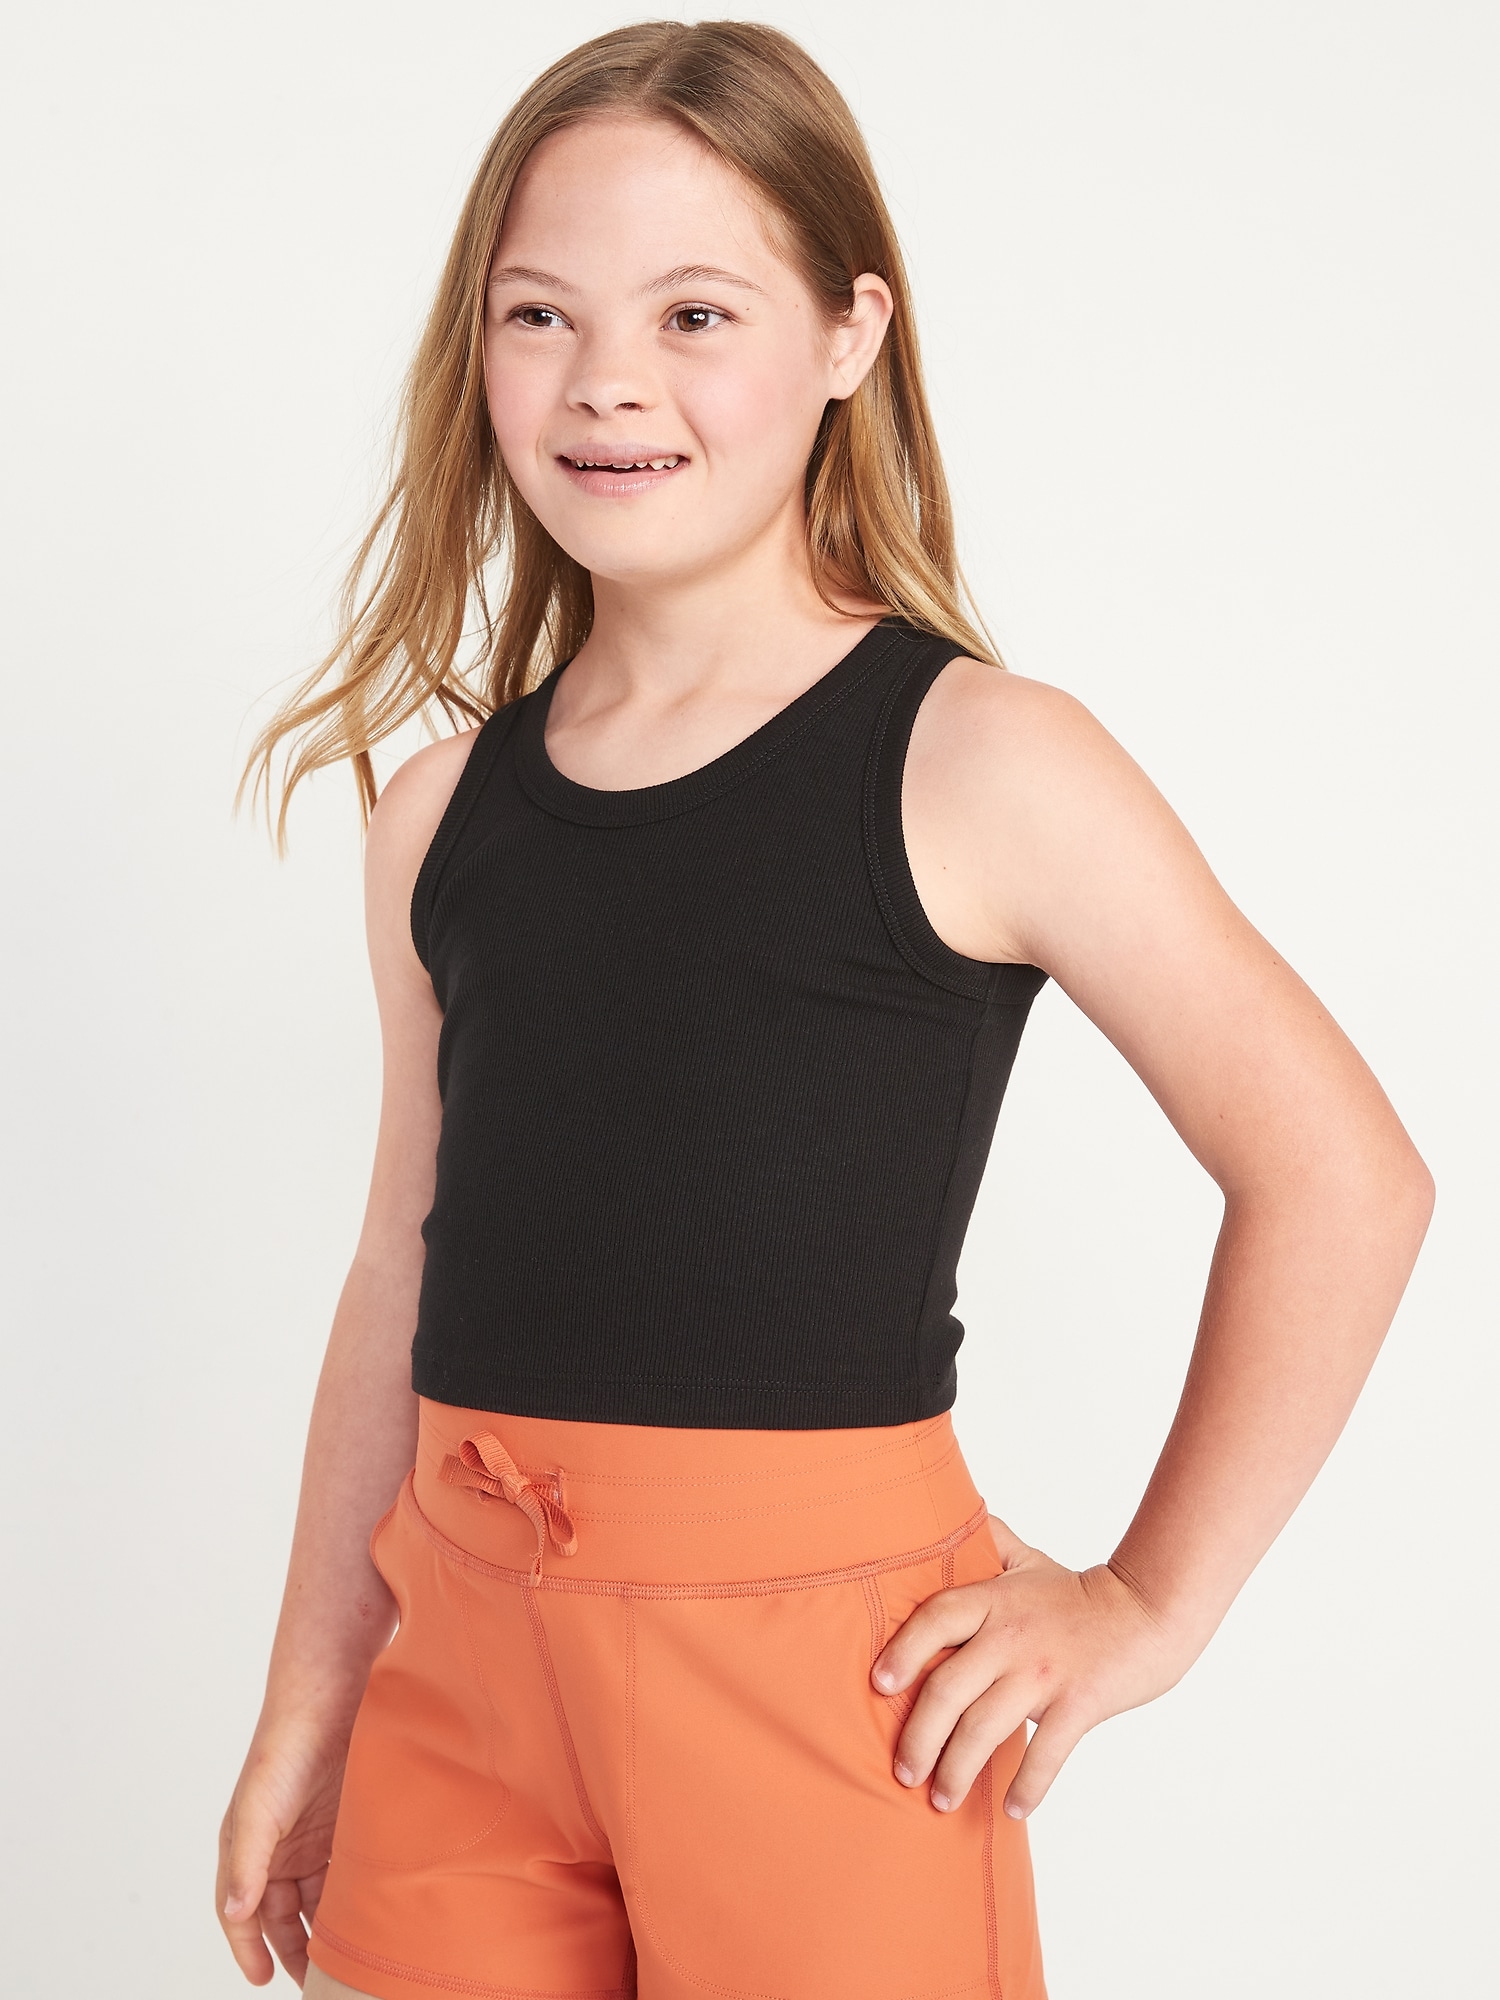 Old Navy Cropped UltraLite Rib-Knit Performance Tank for Girls black. 1